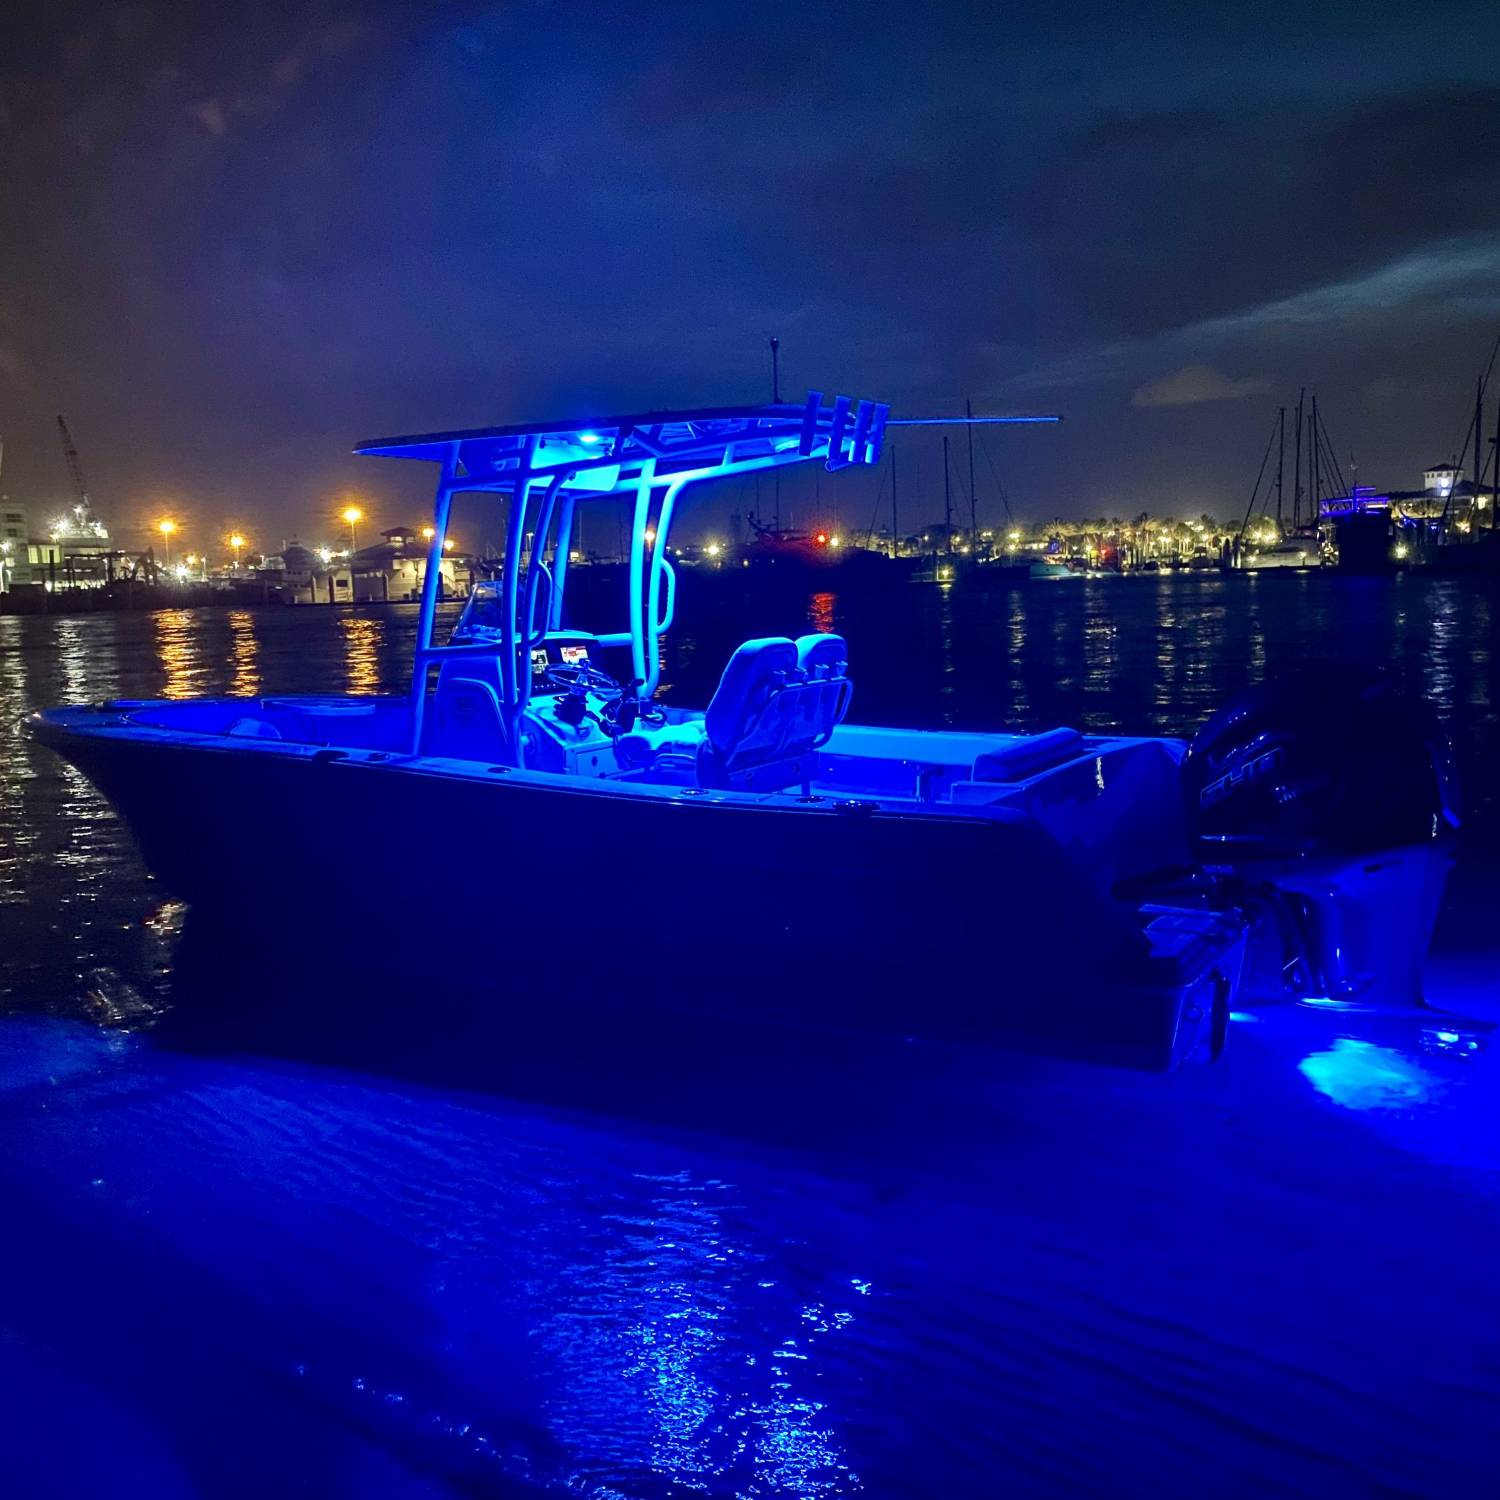 Title: Baby Blue Eyes - On board their Sportsman Open 232 Center Console - Location: Peanut Island, West Palm Beach, FL. Participating in the Photo Contest #SportsmanOctober